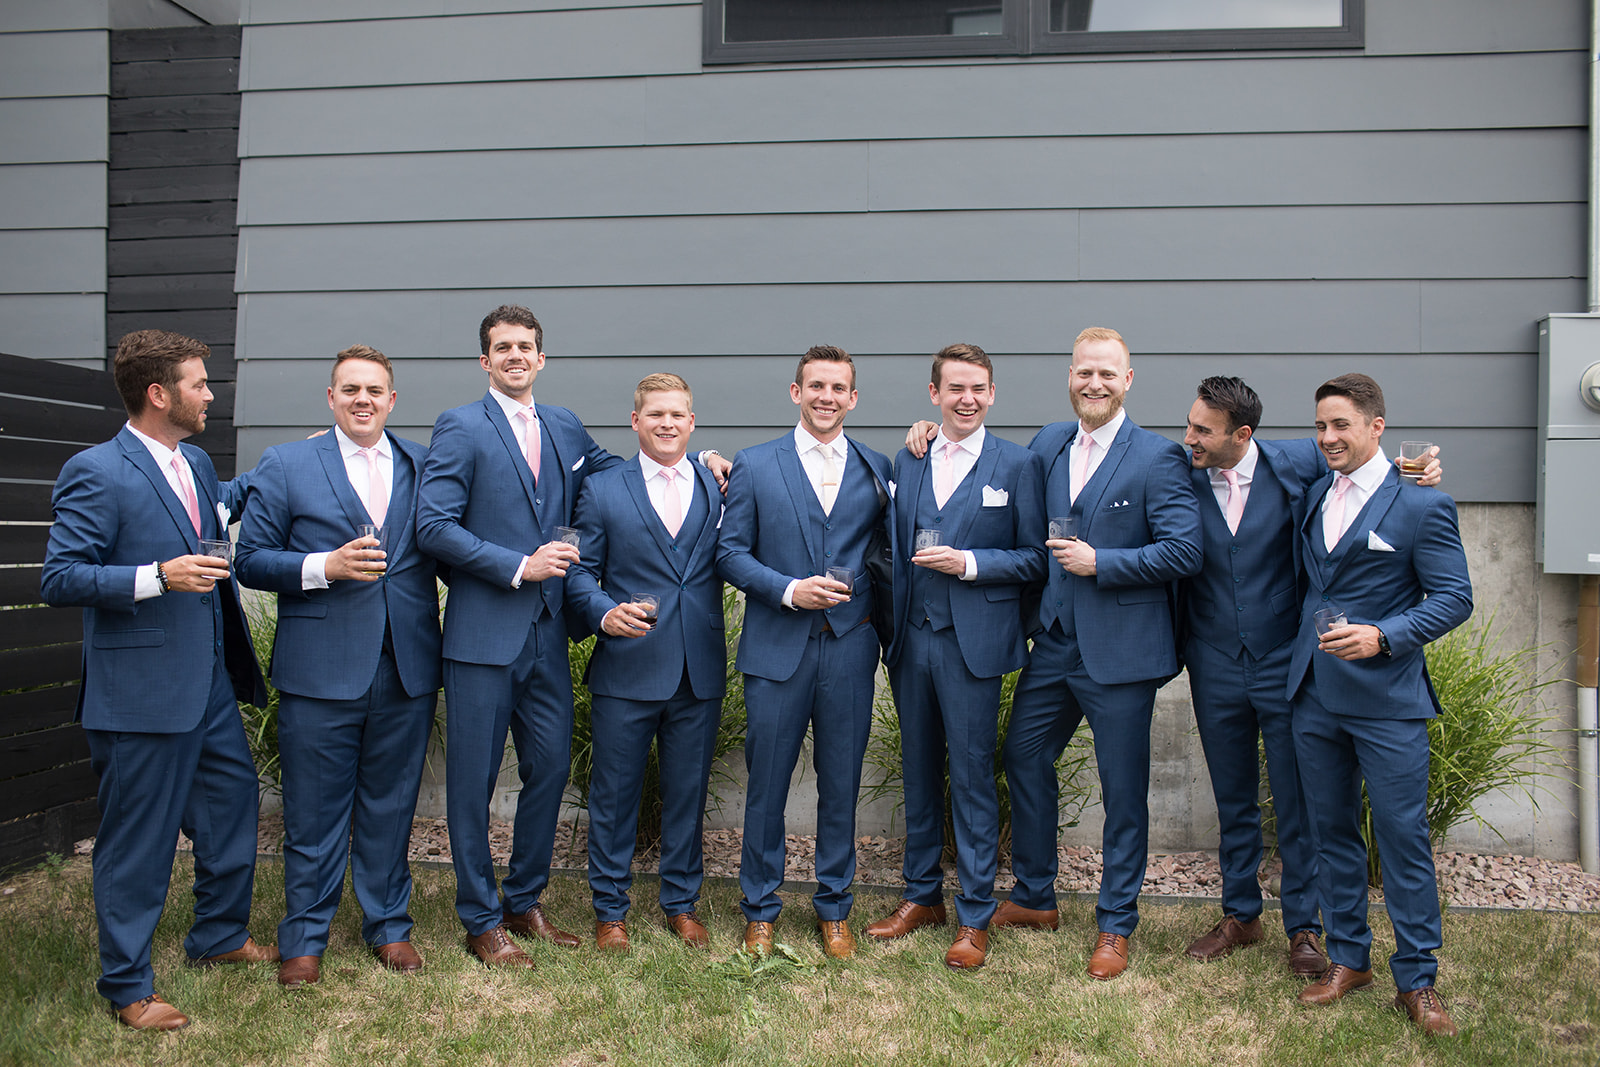 Groom and groomsmen posing for picture before downtown wedding